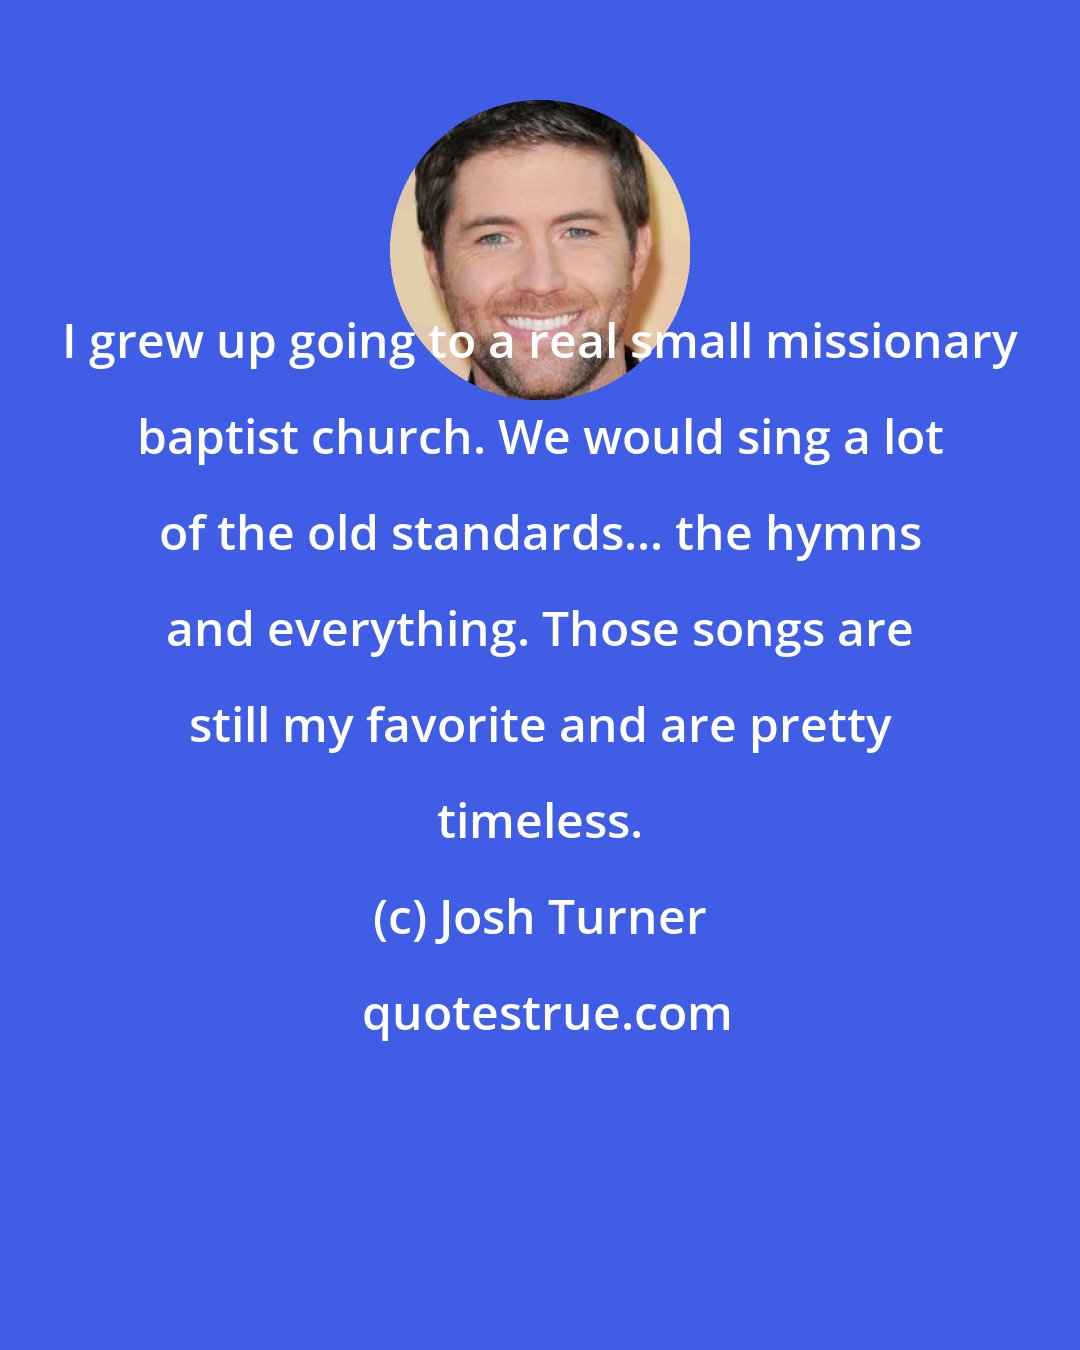 Josh Turner: I grew up going to a real small missionary baptist church. We would sing a lot of the old standards... the hymns and everything. Those songs are still my favorite and are pretty timeless.